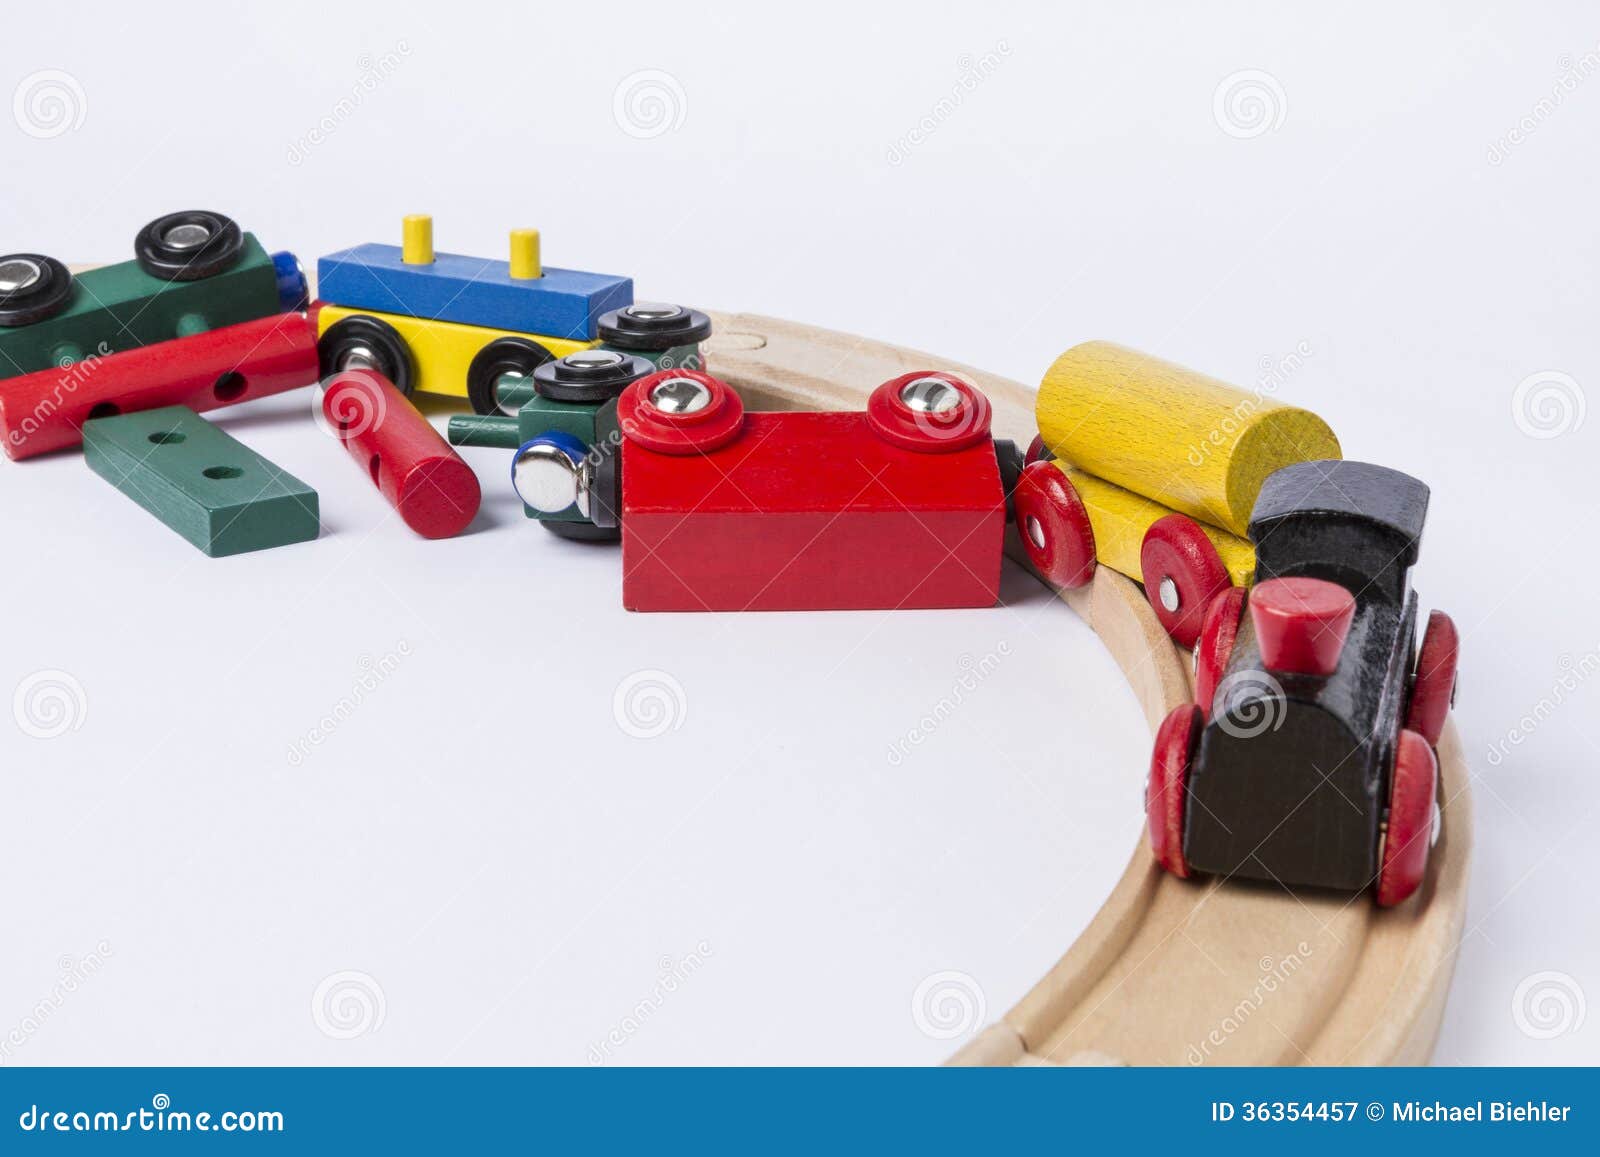 Derail wooden toy train in top view. horizontal image.